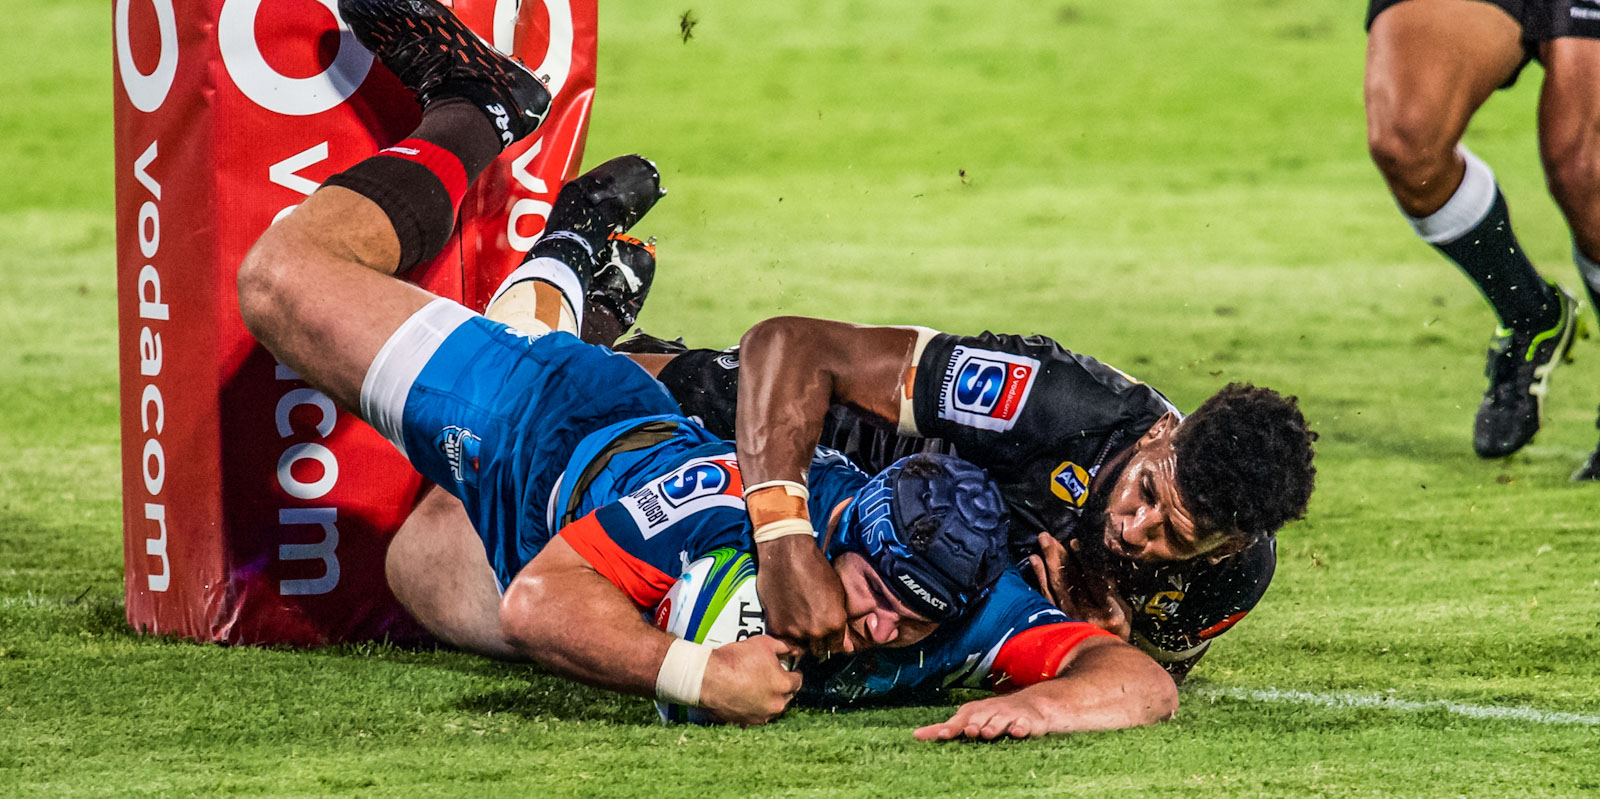 Marco van Staden goes over for his first try.